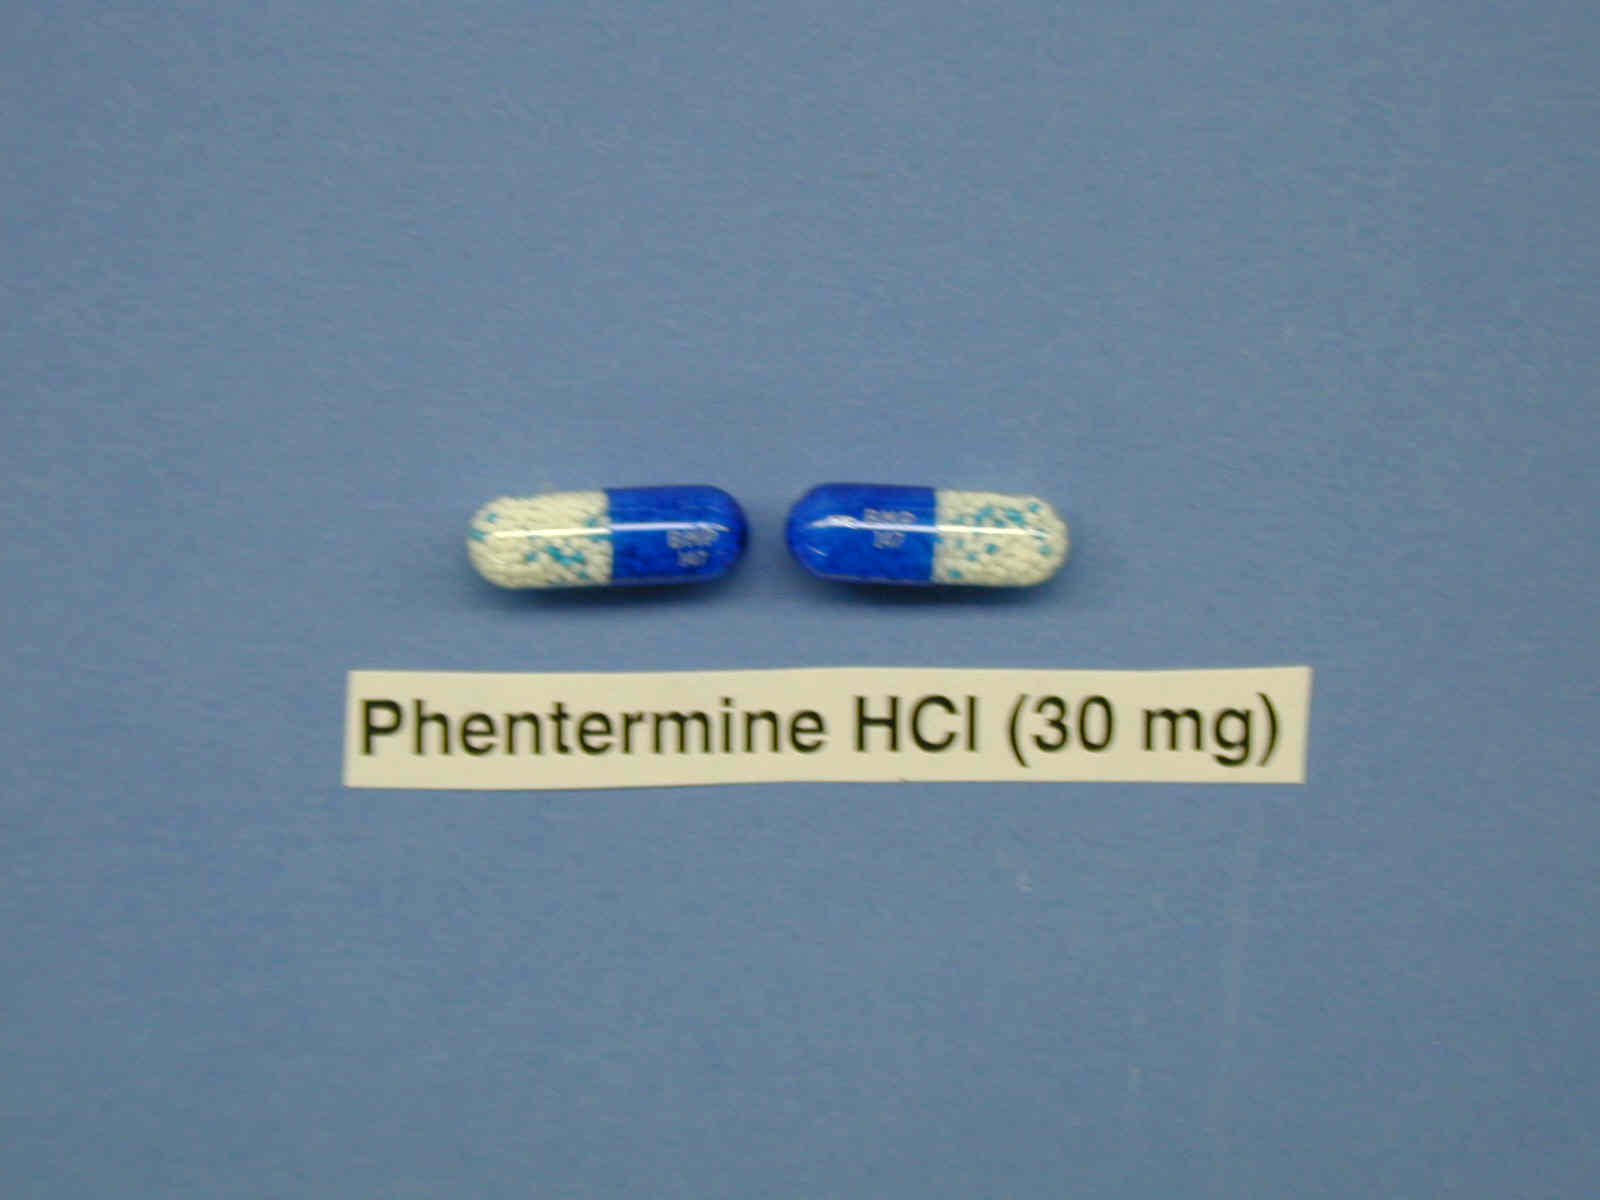 over the counter phentermine